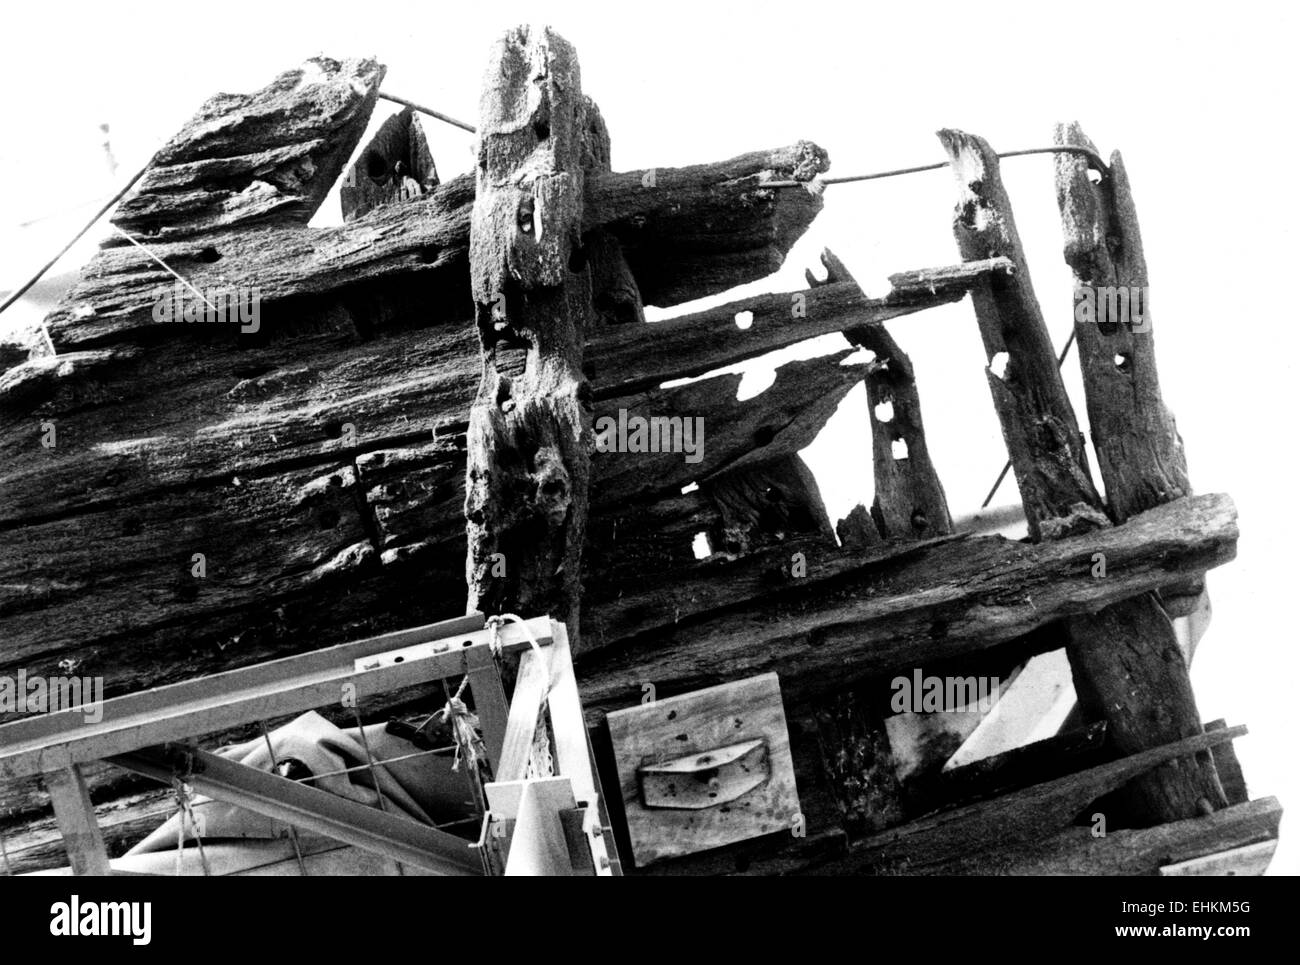 AJAXNETPHOTO. 8TH DECEMBER, 1982. PORTSMOUTH,ENGLAND. - TUDOR WARSHIP COMES HOME - THE REMAINS OF HENRY VIII'S TUDOR WARSHIP MARY ROSE RECOVERED FROM THE SOLENT SEABED ON 12/10/82 SHOWS PART OF THE BOW SECTION TIMBERS.  PHOTO:SIMON BARNETT/AJAX REF:821208 10 Stock Photo